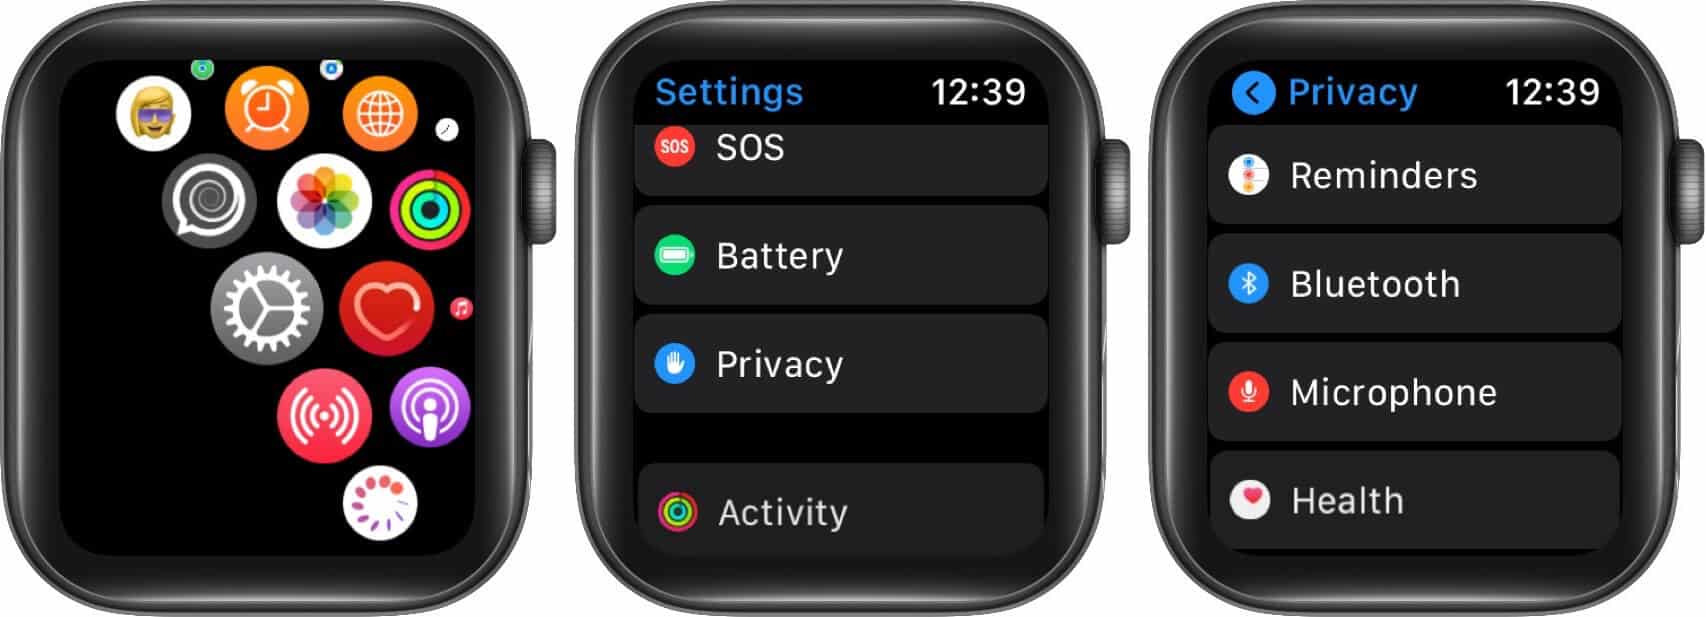 open settings tap on privacy and then tap on microphone on apple watch